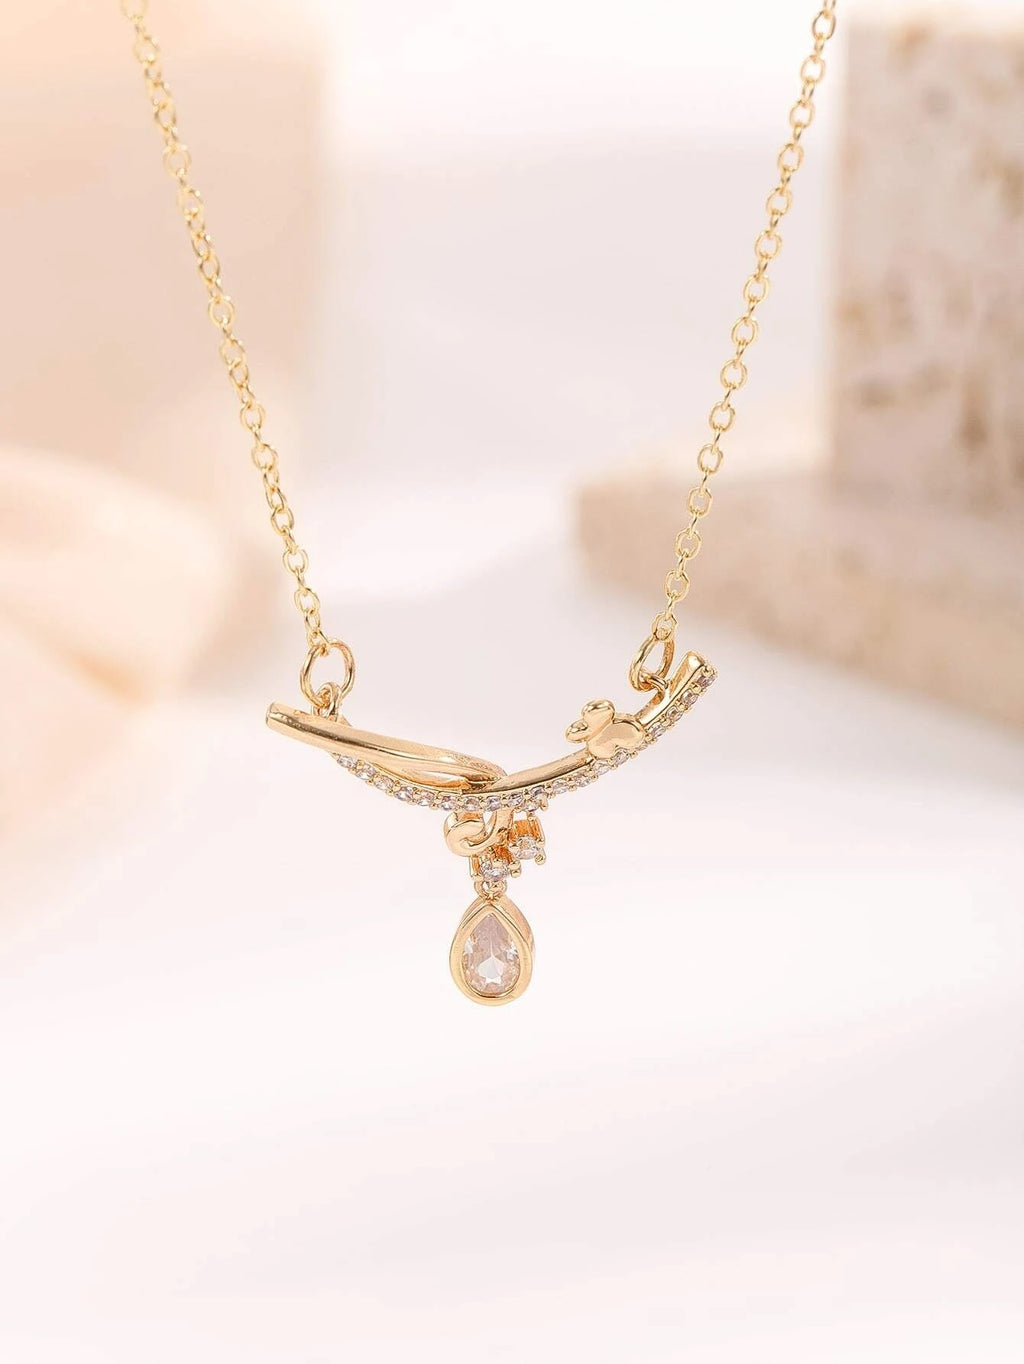 Crystal Gold Butterfly Flower Girl Necklace, Bridal Floral Chain CZ Diamond Fashion Necklace - KaleaBoutique.com